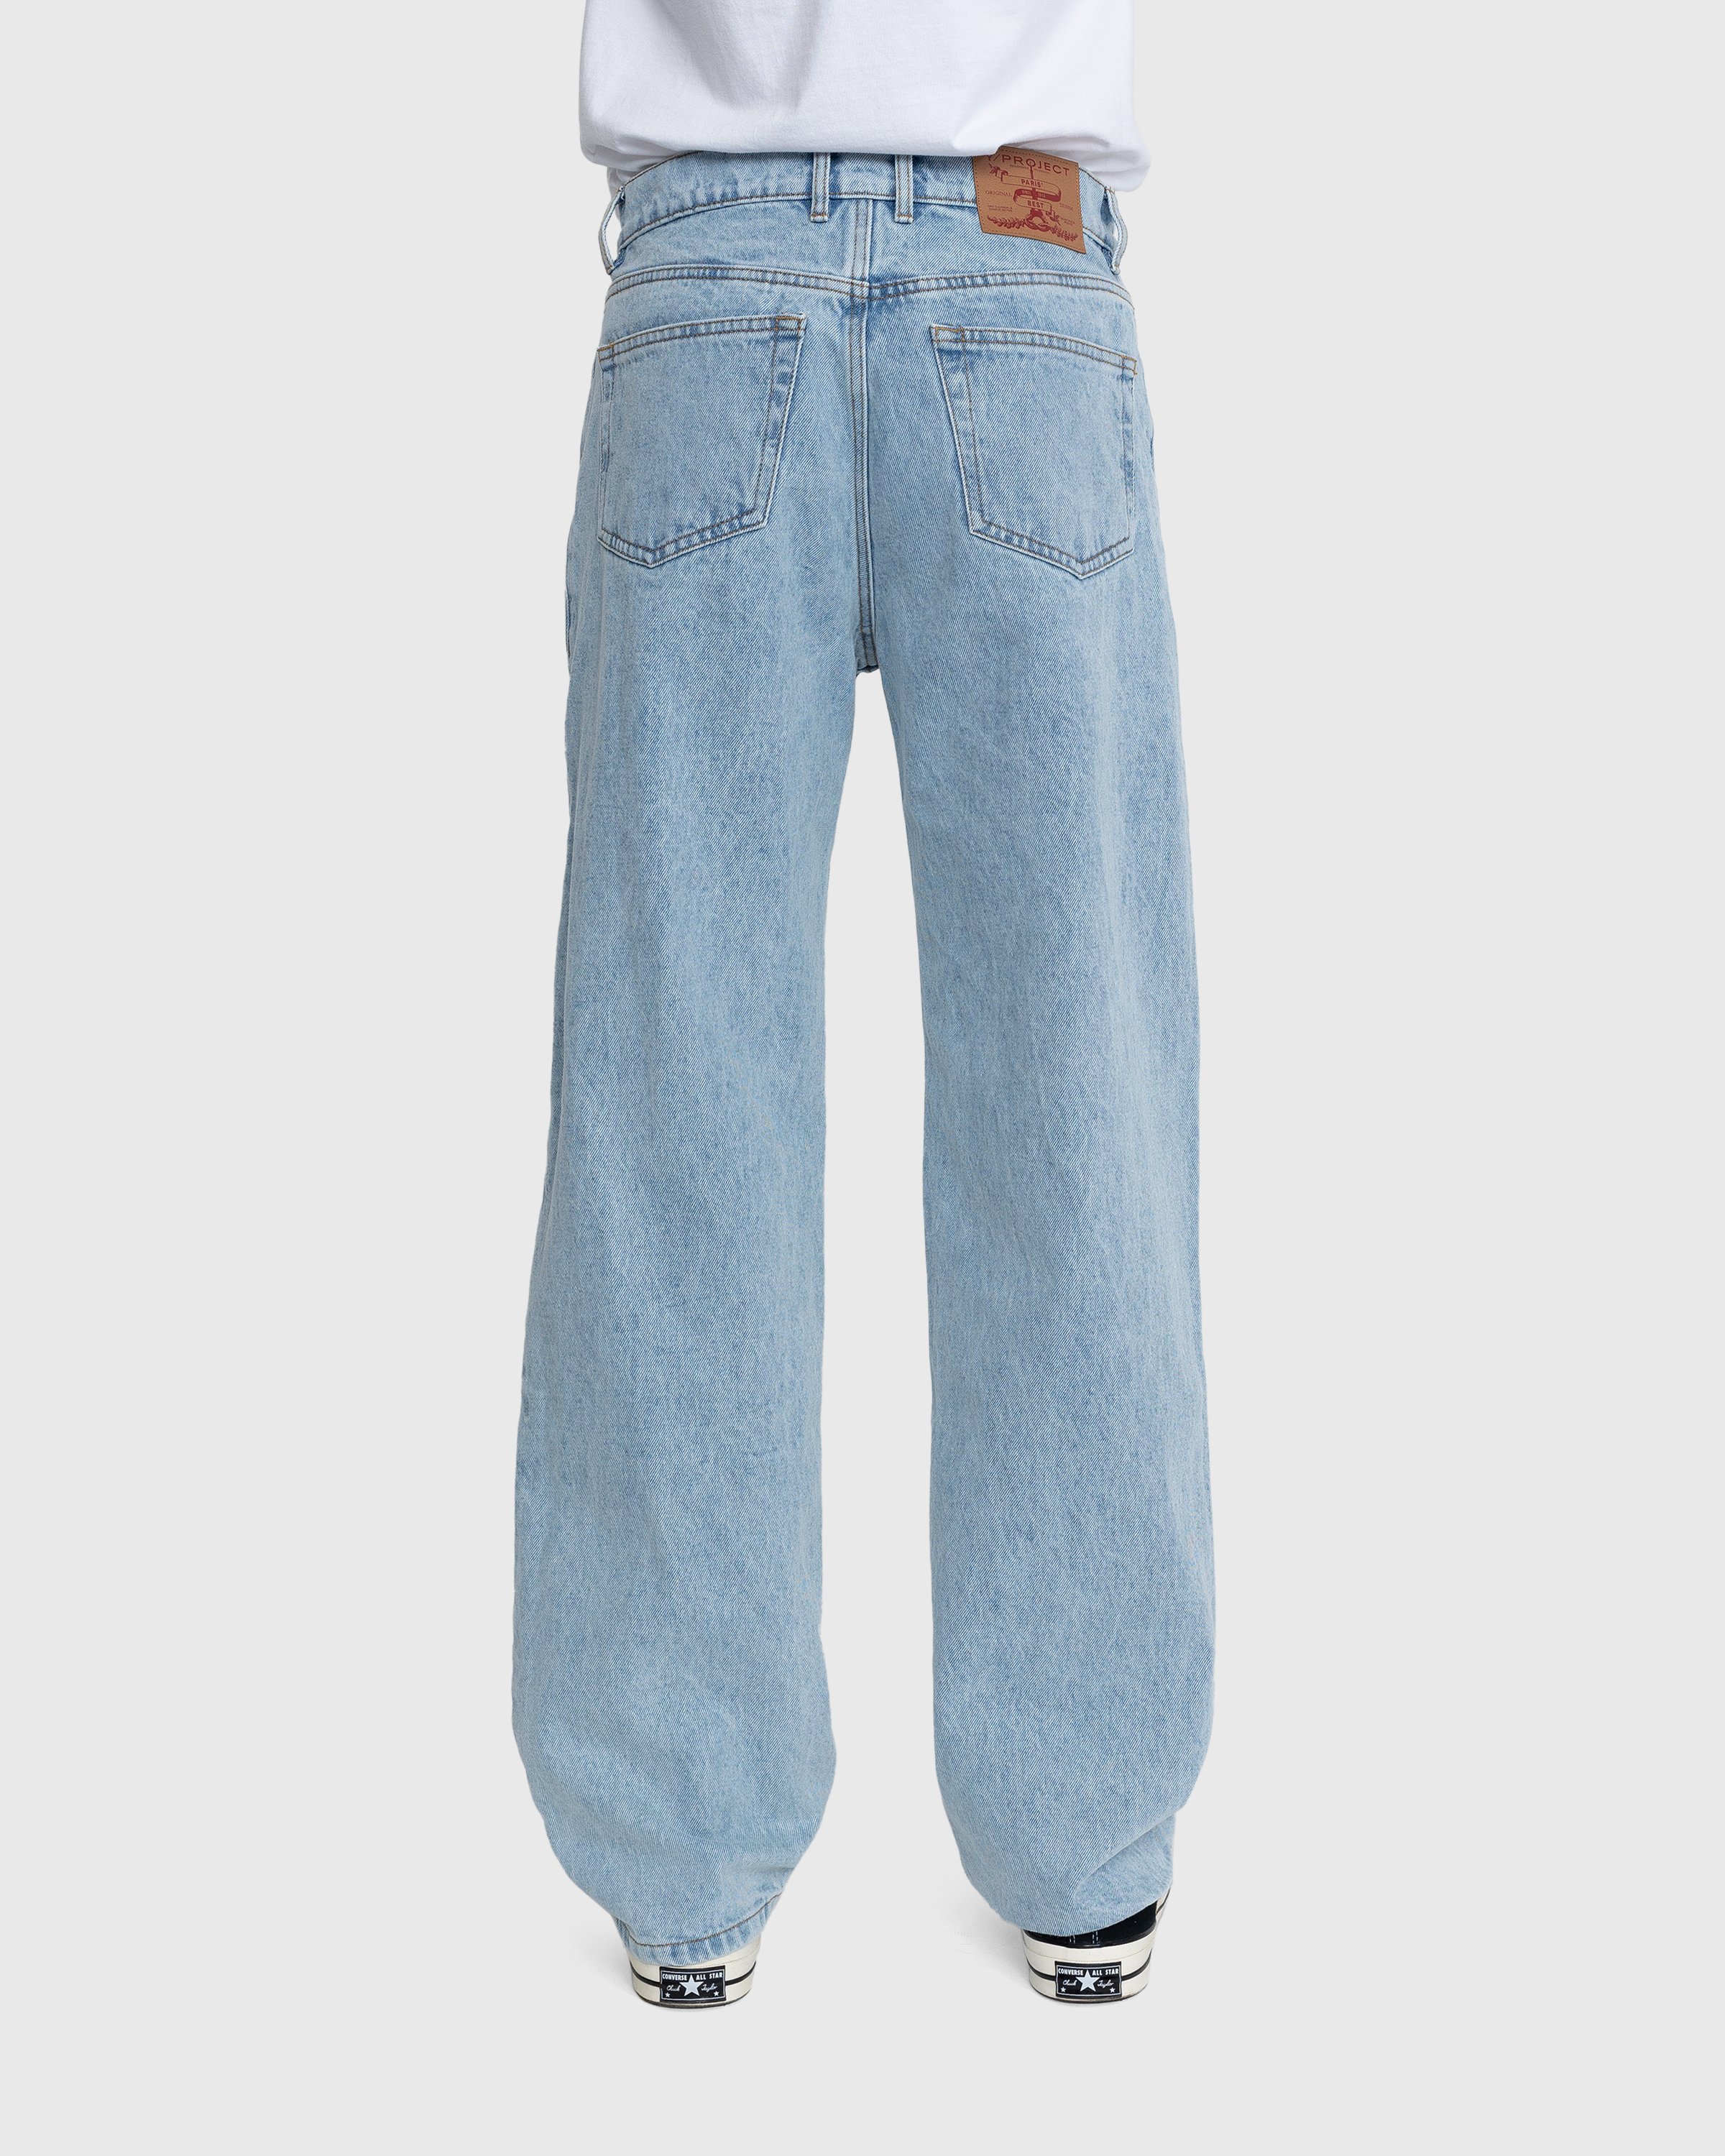 Y/Project - Pinched Logo Jeans Blue - Clothing - Blue - Image 4